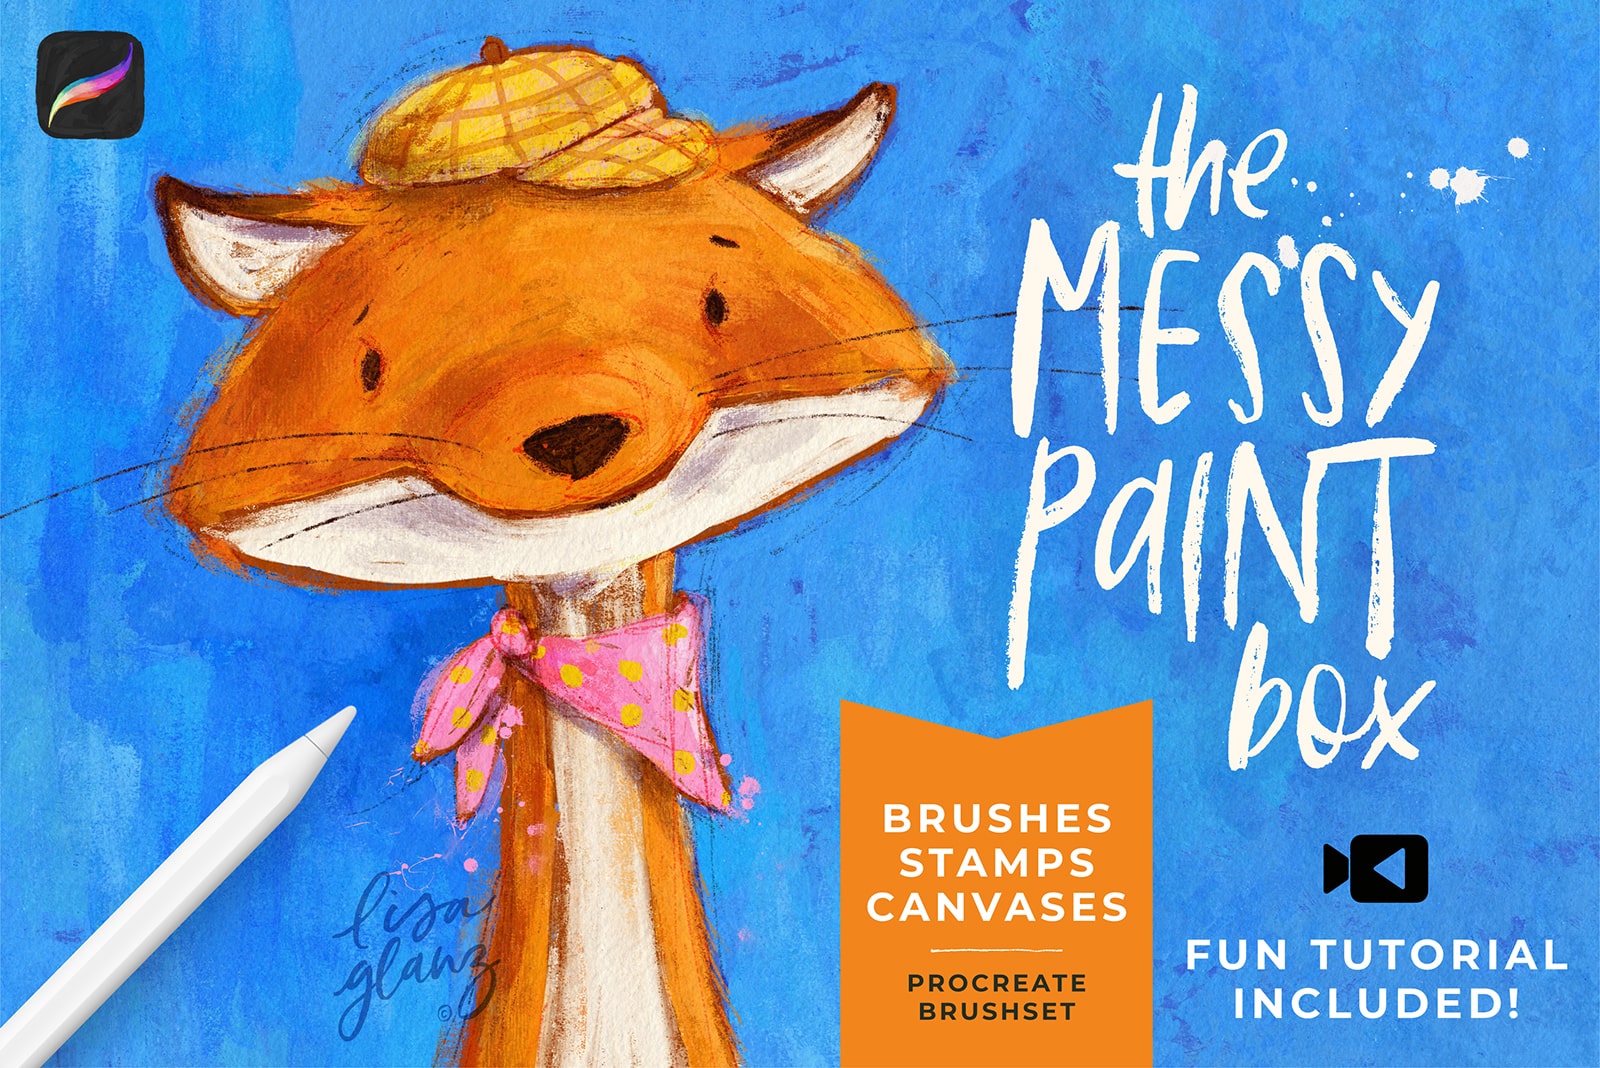 The Messy Paint Box Brushes for Procreate